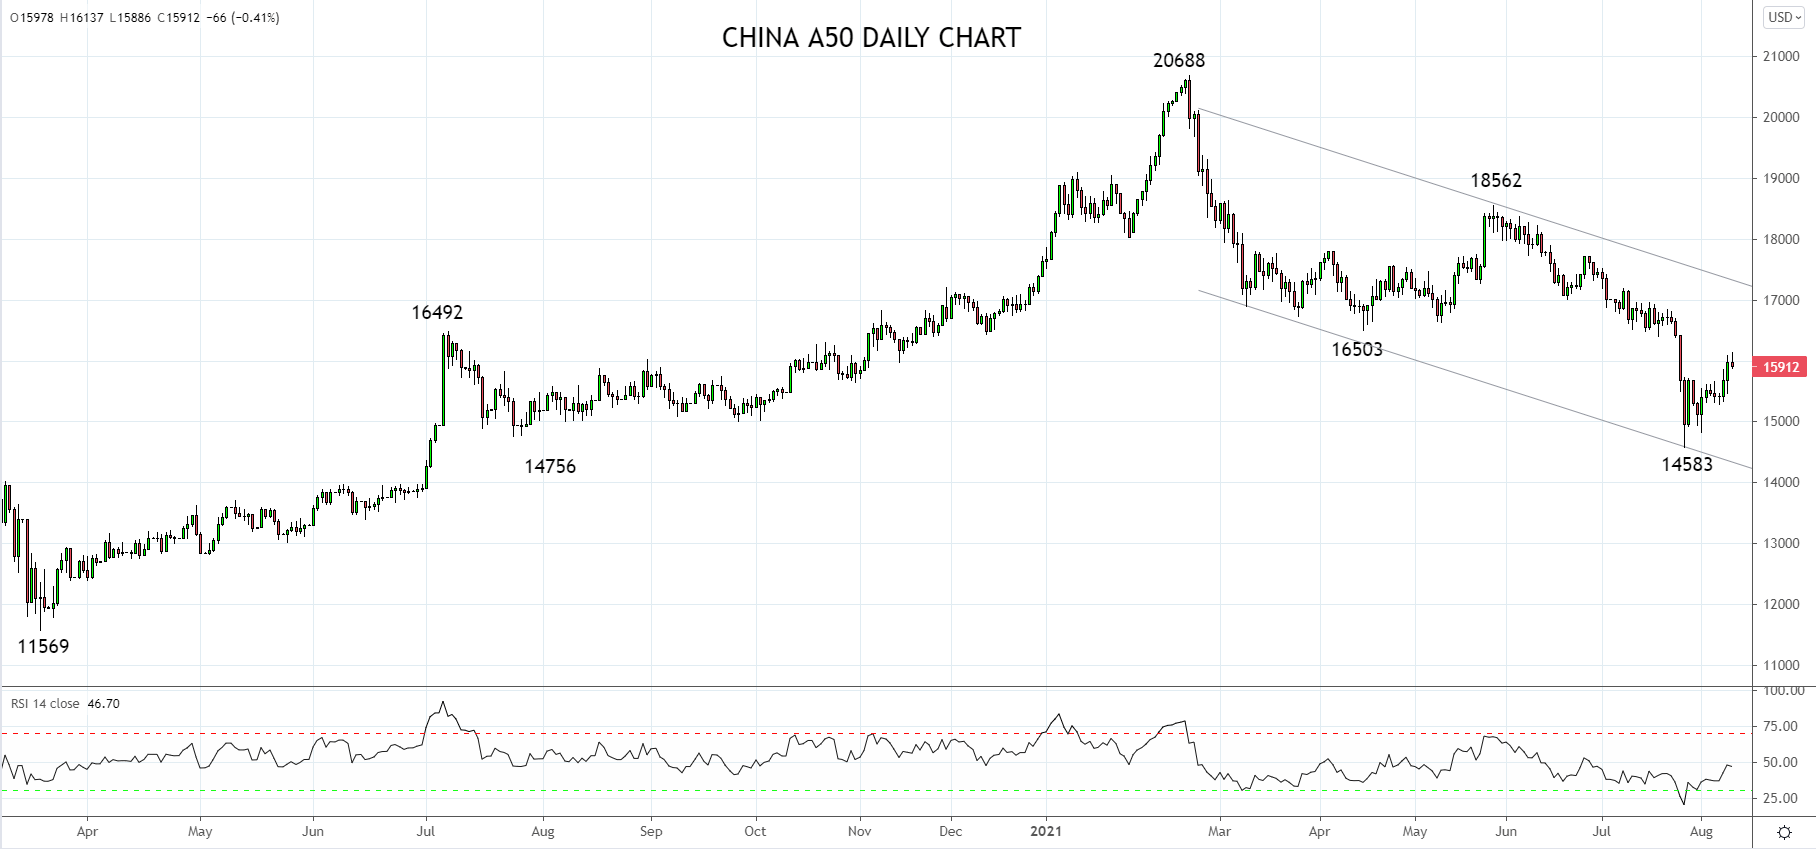 Market chart showing performance of  China A50. Published August 2021 by FOREX.com